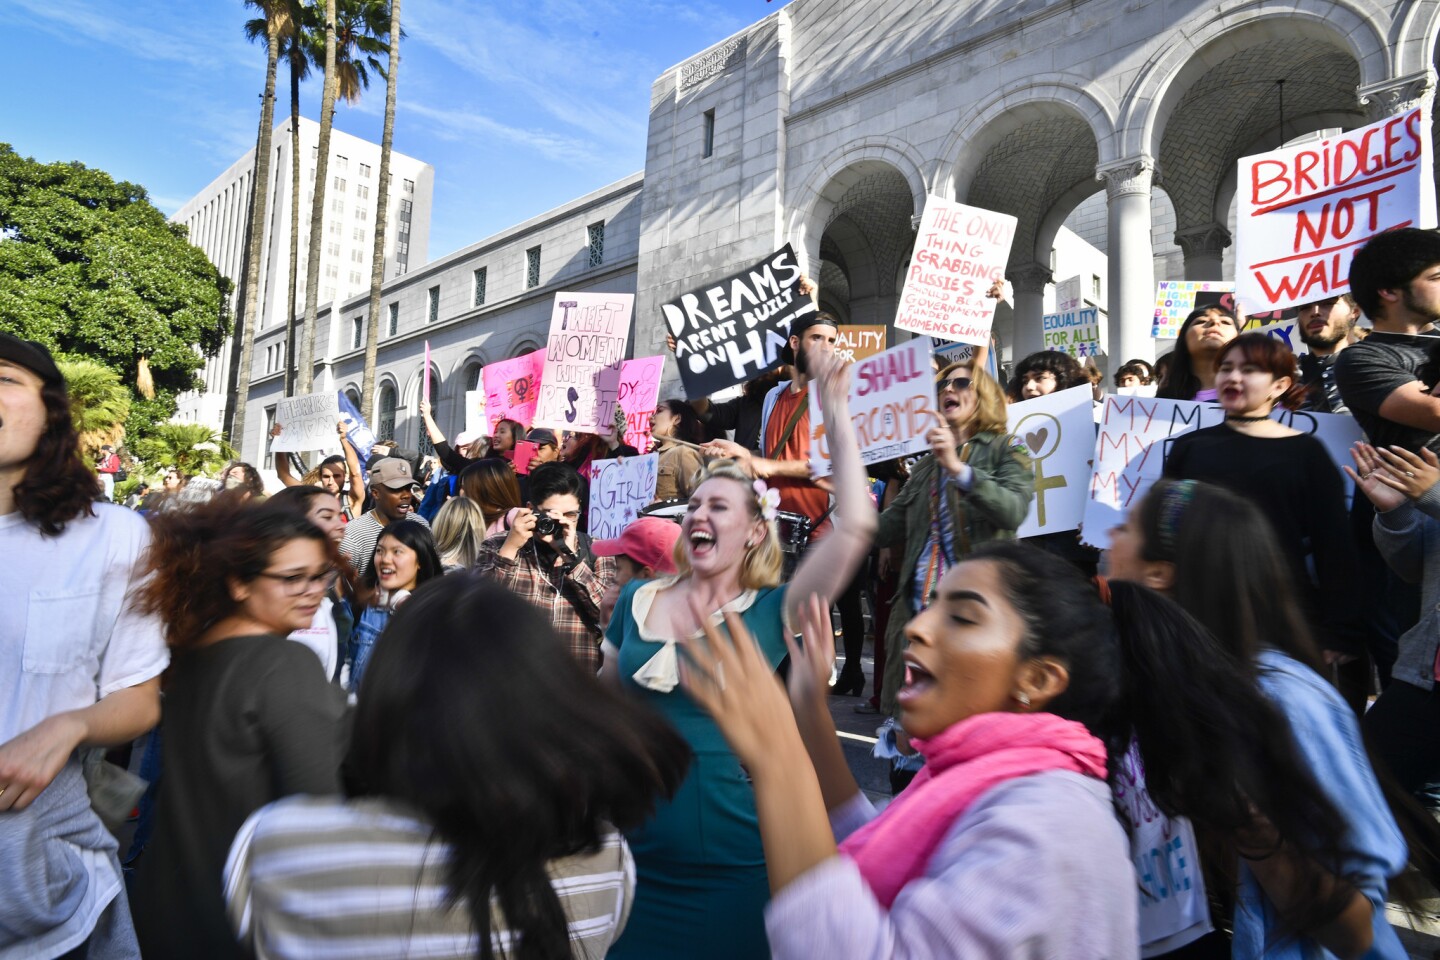 Demonstrators line the steps of City Hall while chanting slogans and dancing after the women's march in downtown Los Angeles.